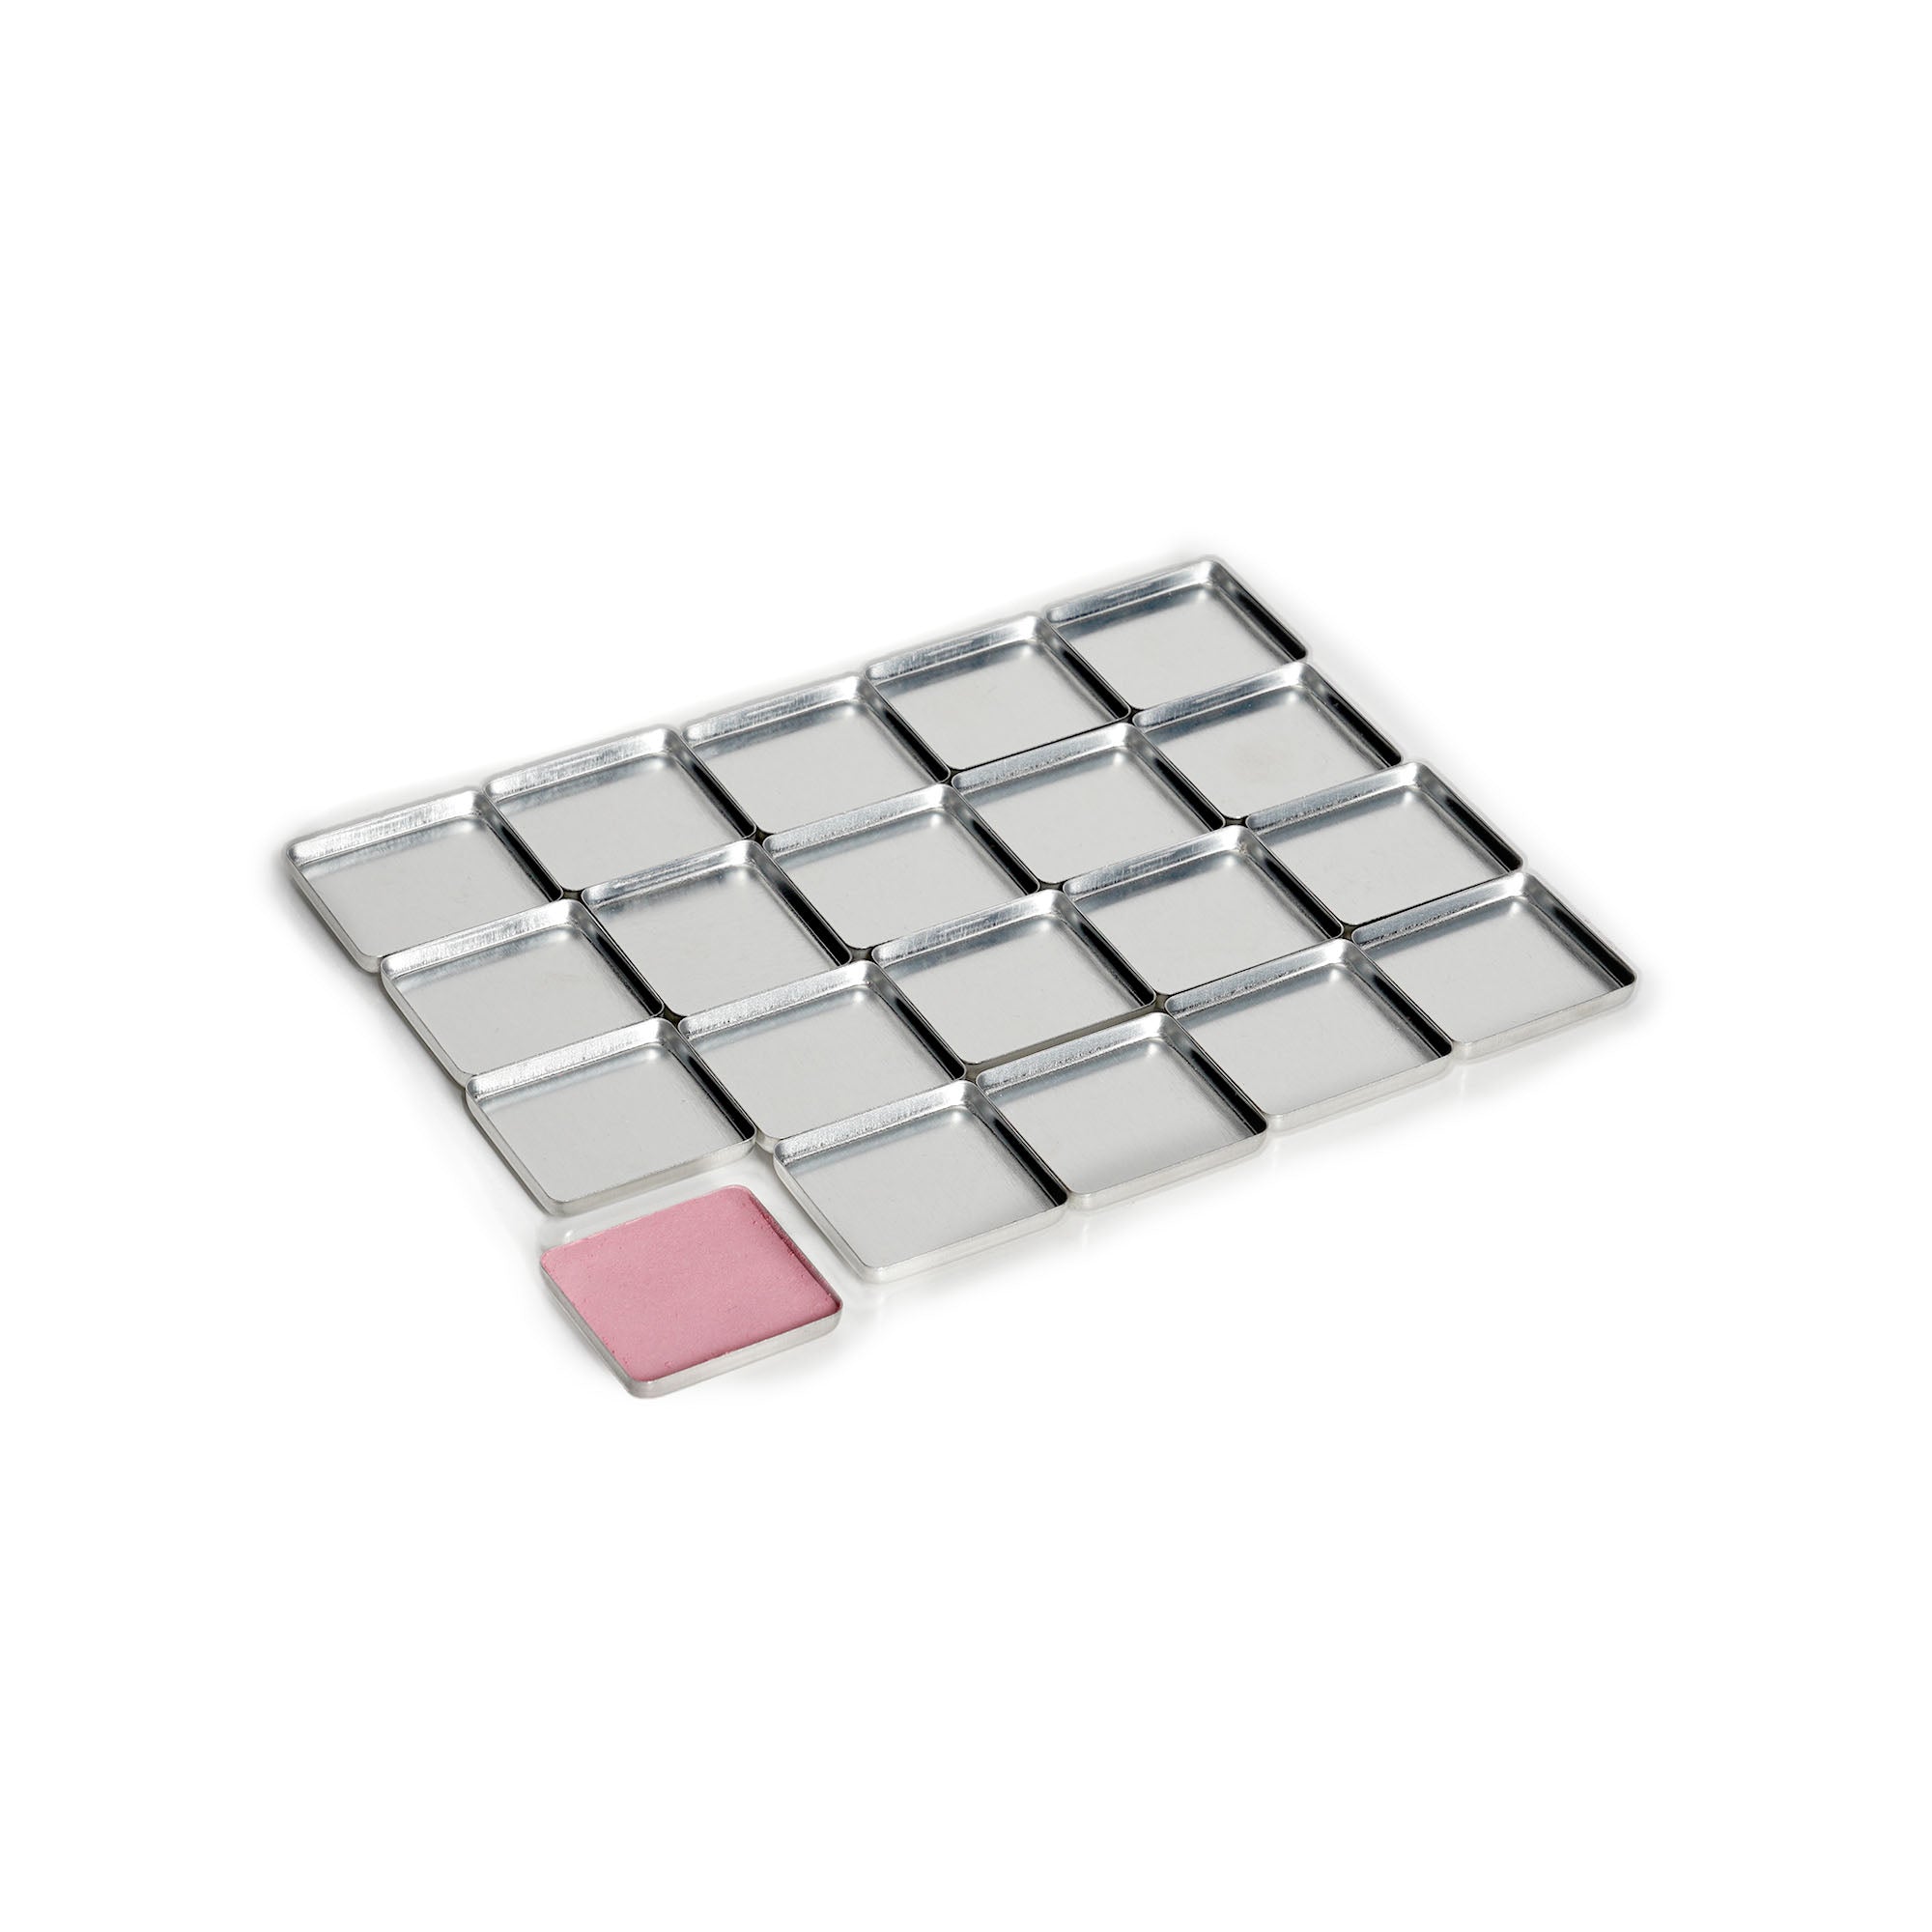 Twenty 20  square-shaped refill magnetic makeup pans, each measuring 31.5 x 28.5mm, for the FIXY Broken Makeup Repressing System, showcasing one pan with product to illustrate usage, ideal for repairing and customizing makeup